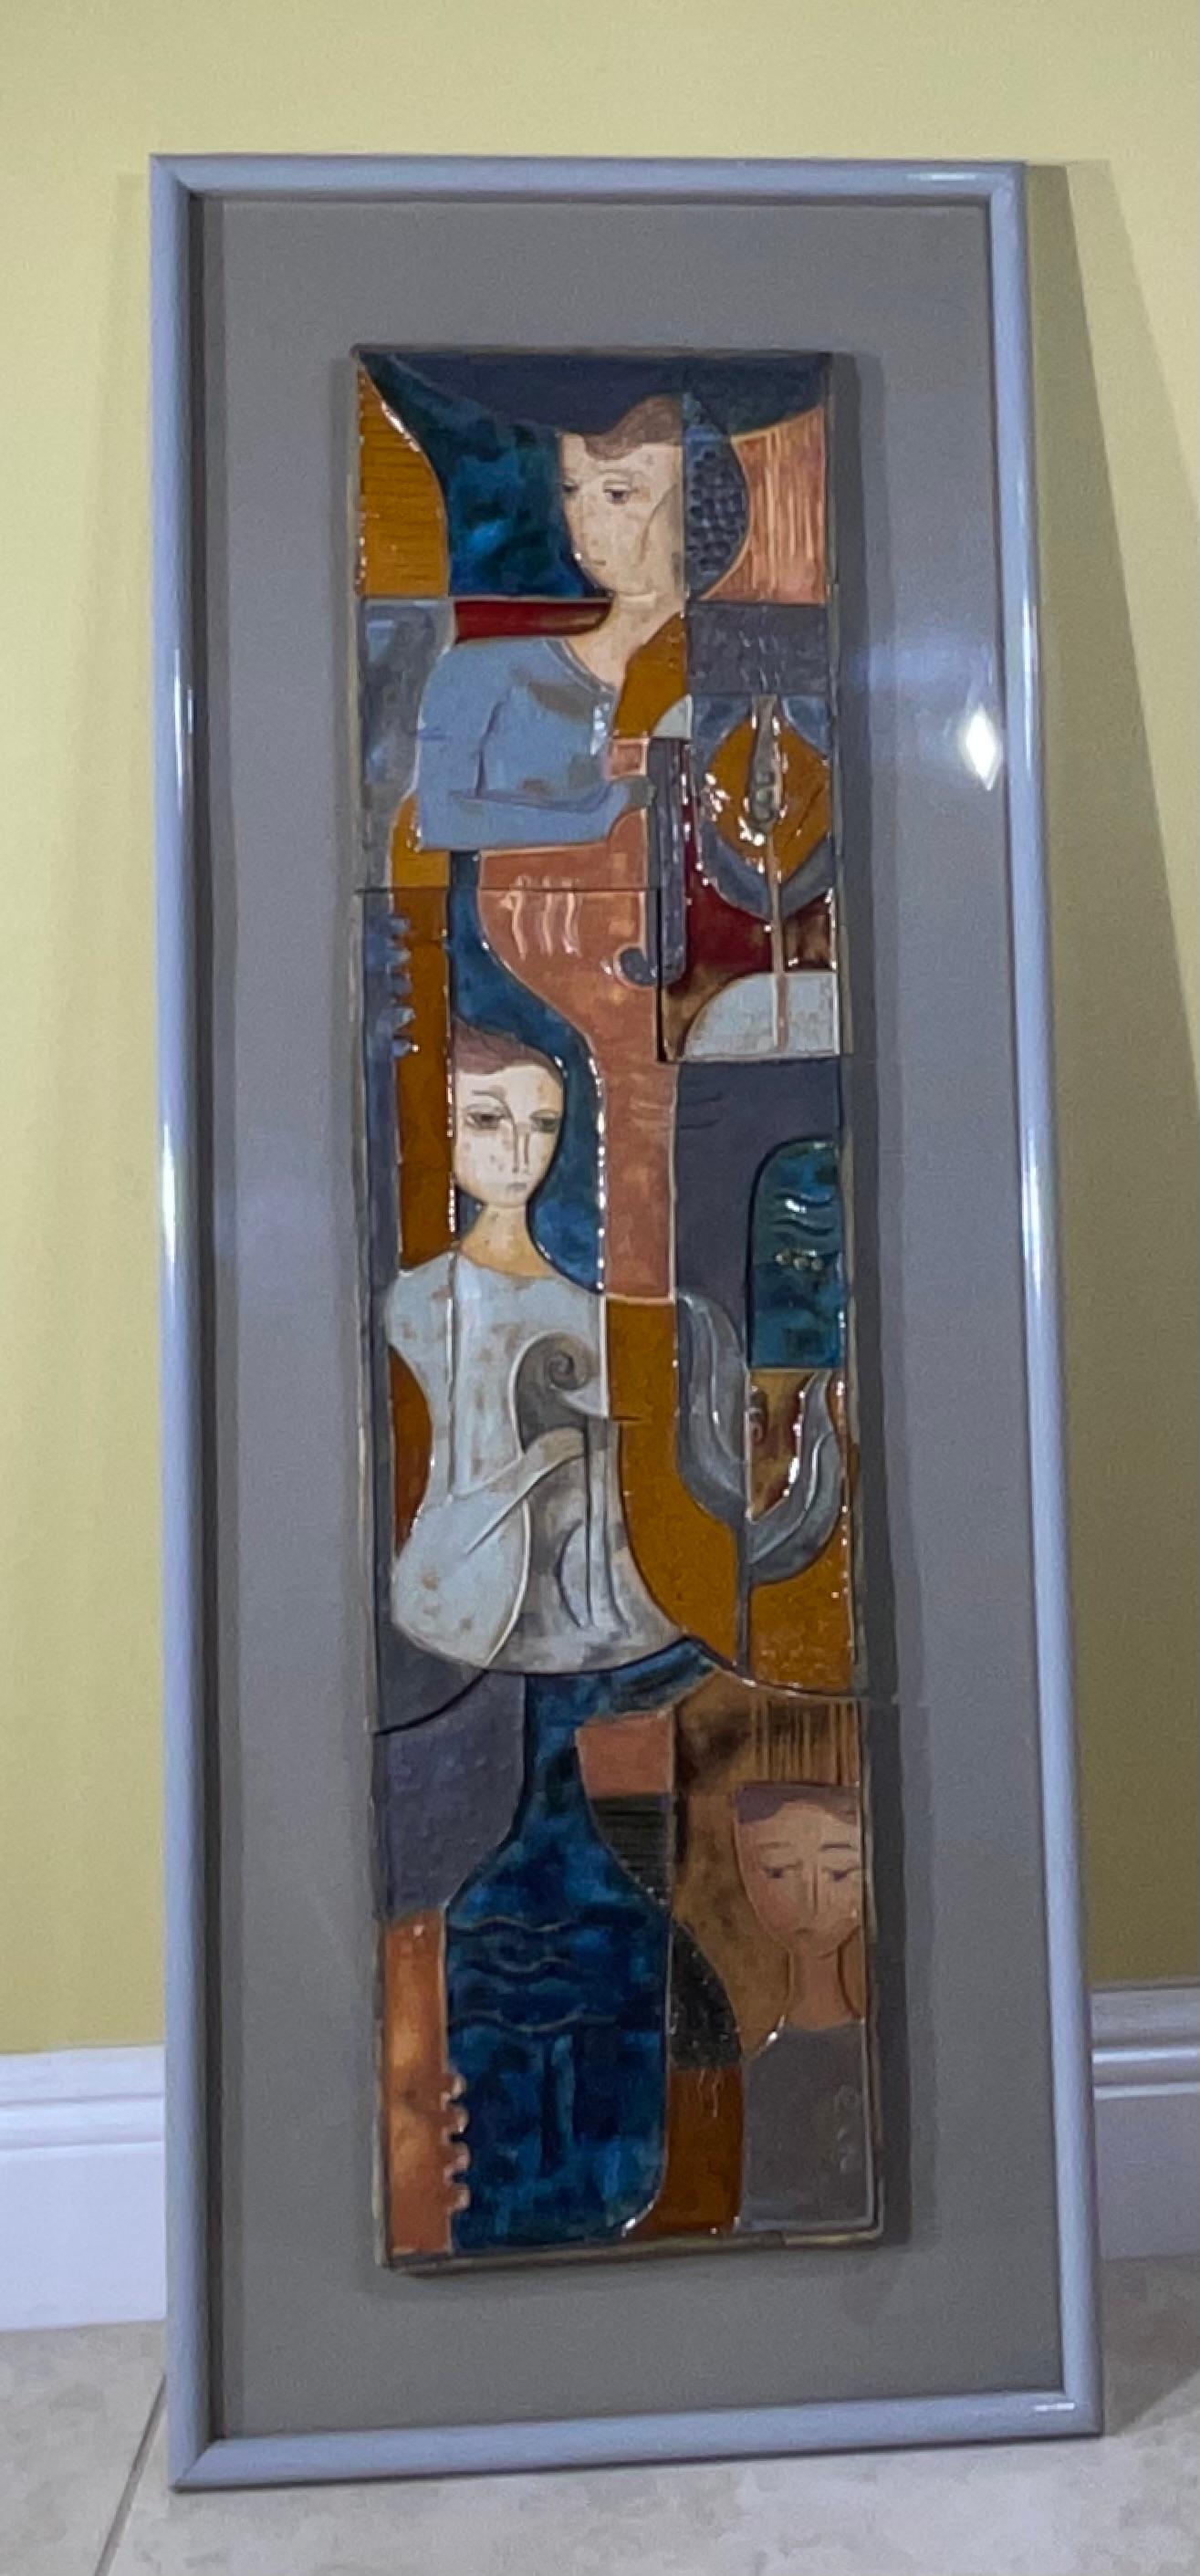  elegant, modernist figurative ceramic tile wall hanging hand-painted and glazed The tile framed on floating glass and a simple wooden frame. 
Actual tile size : 33”.75 x 8”75 x 0.5